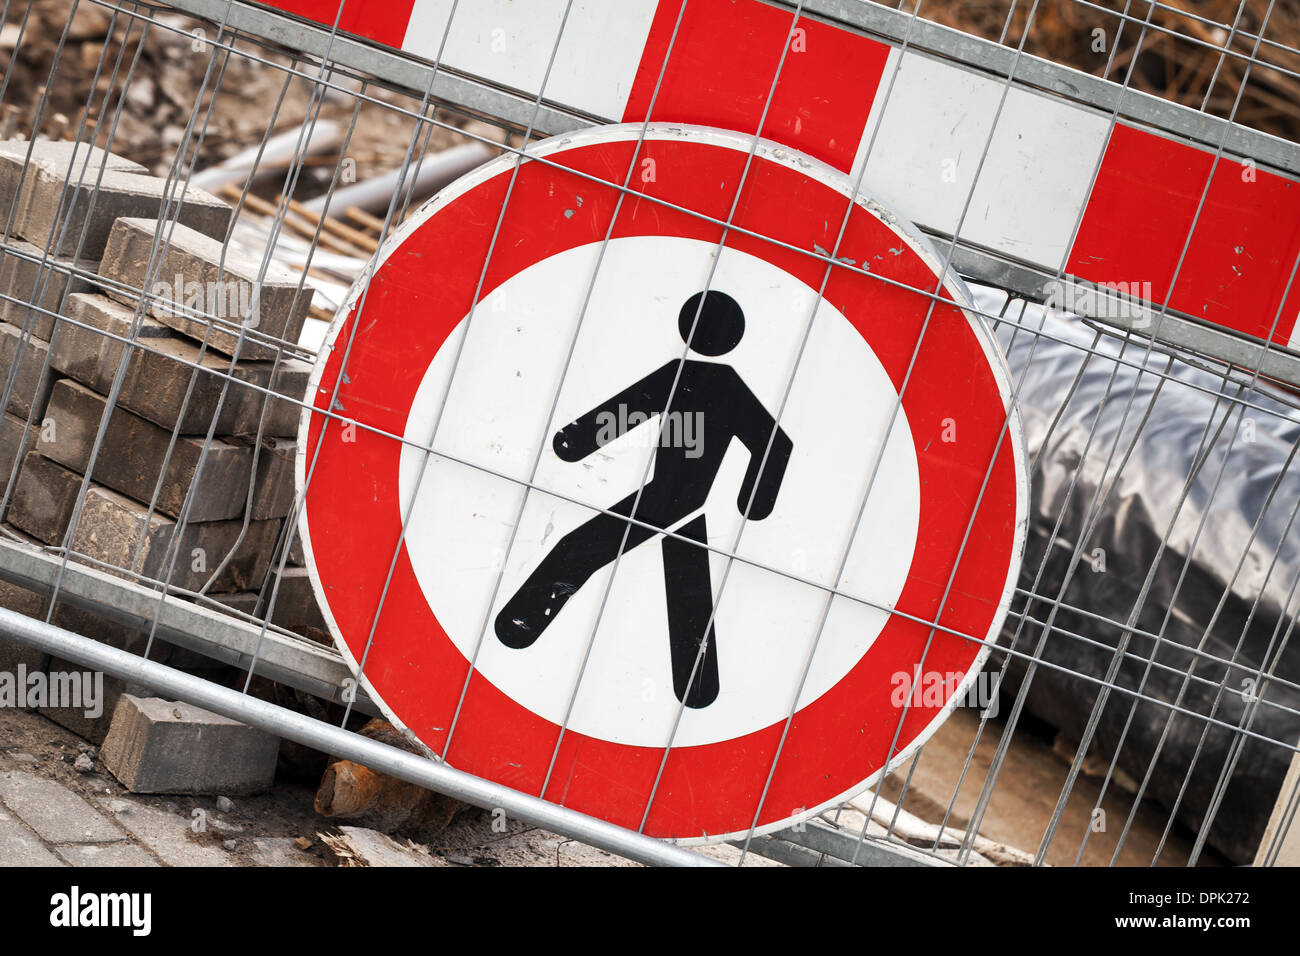 Under construction. Red and white restricted area sign on metal border Stock Photo